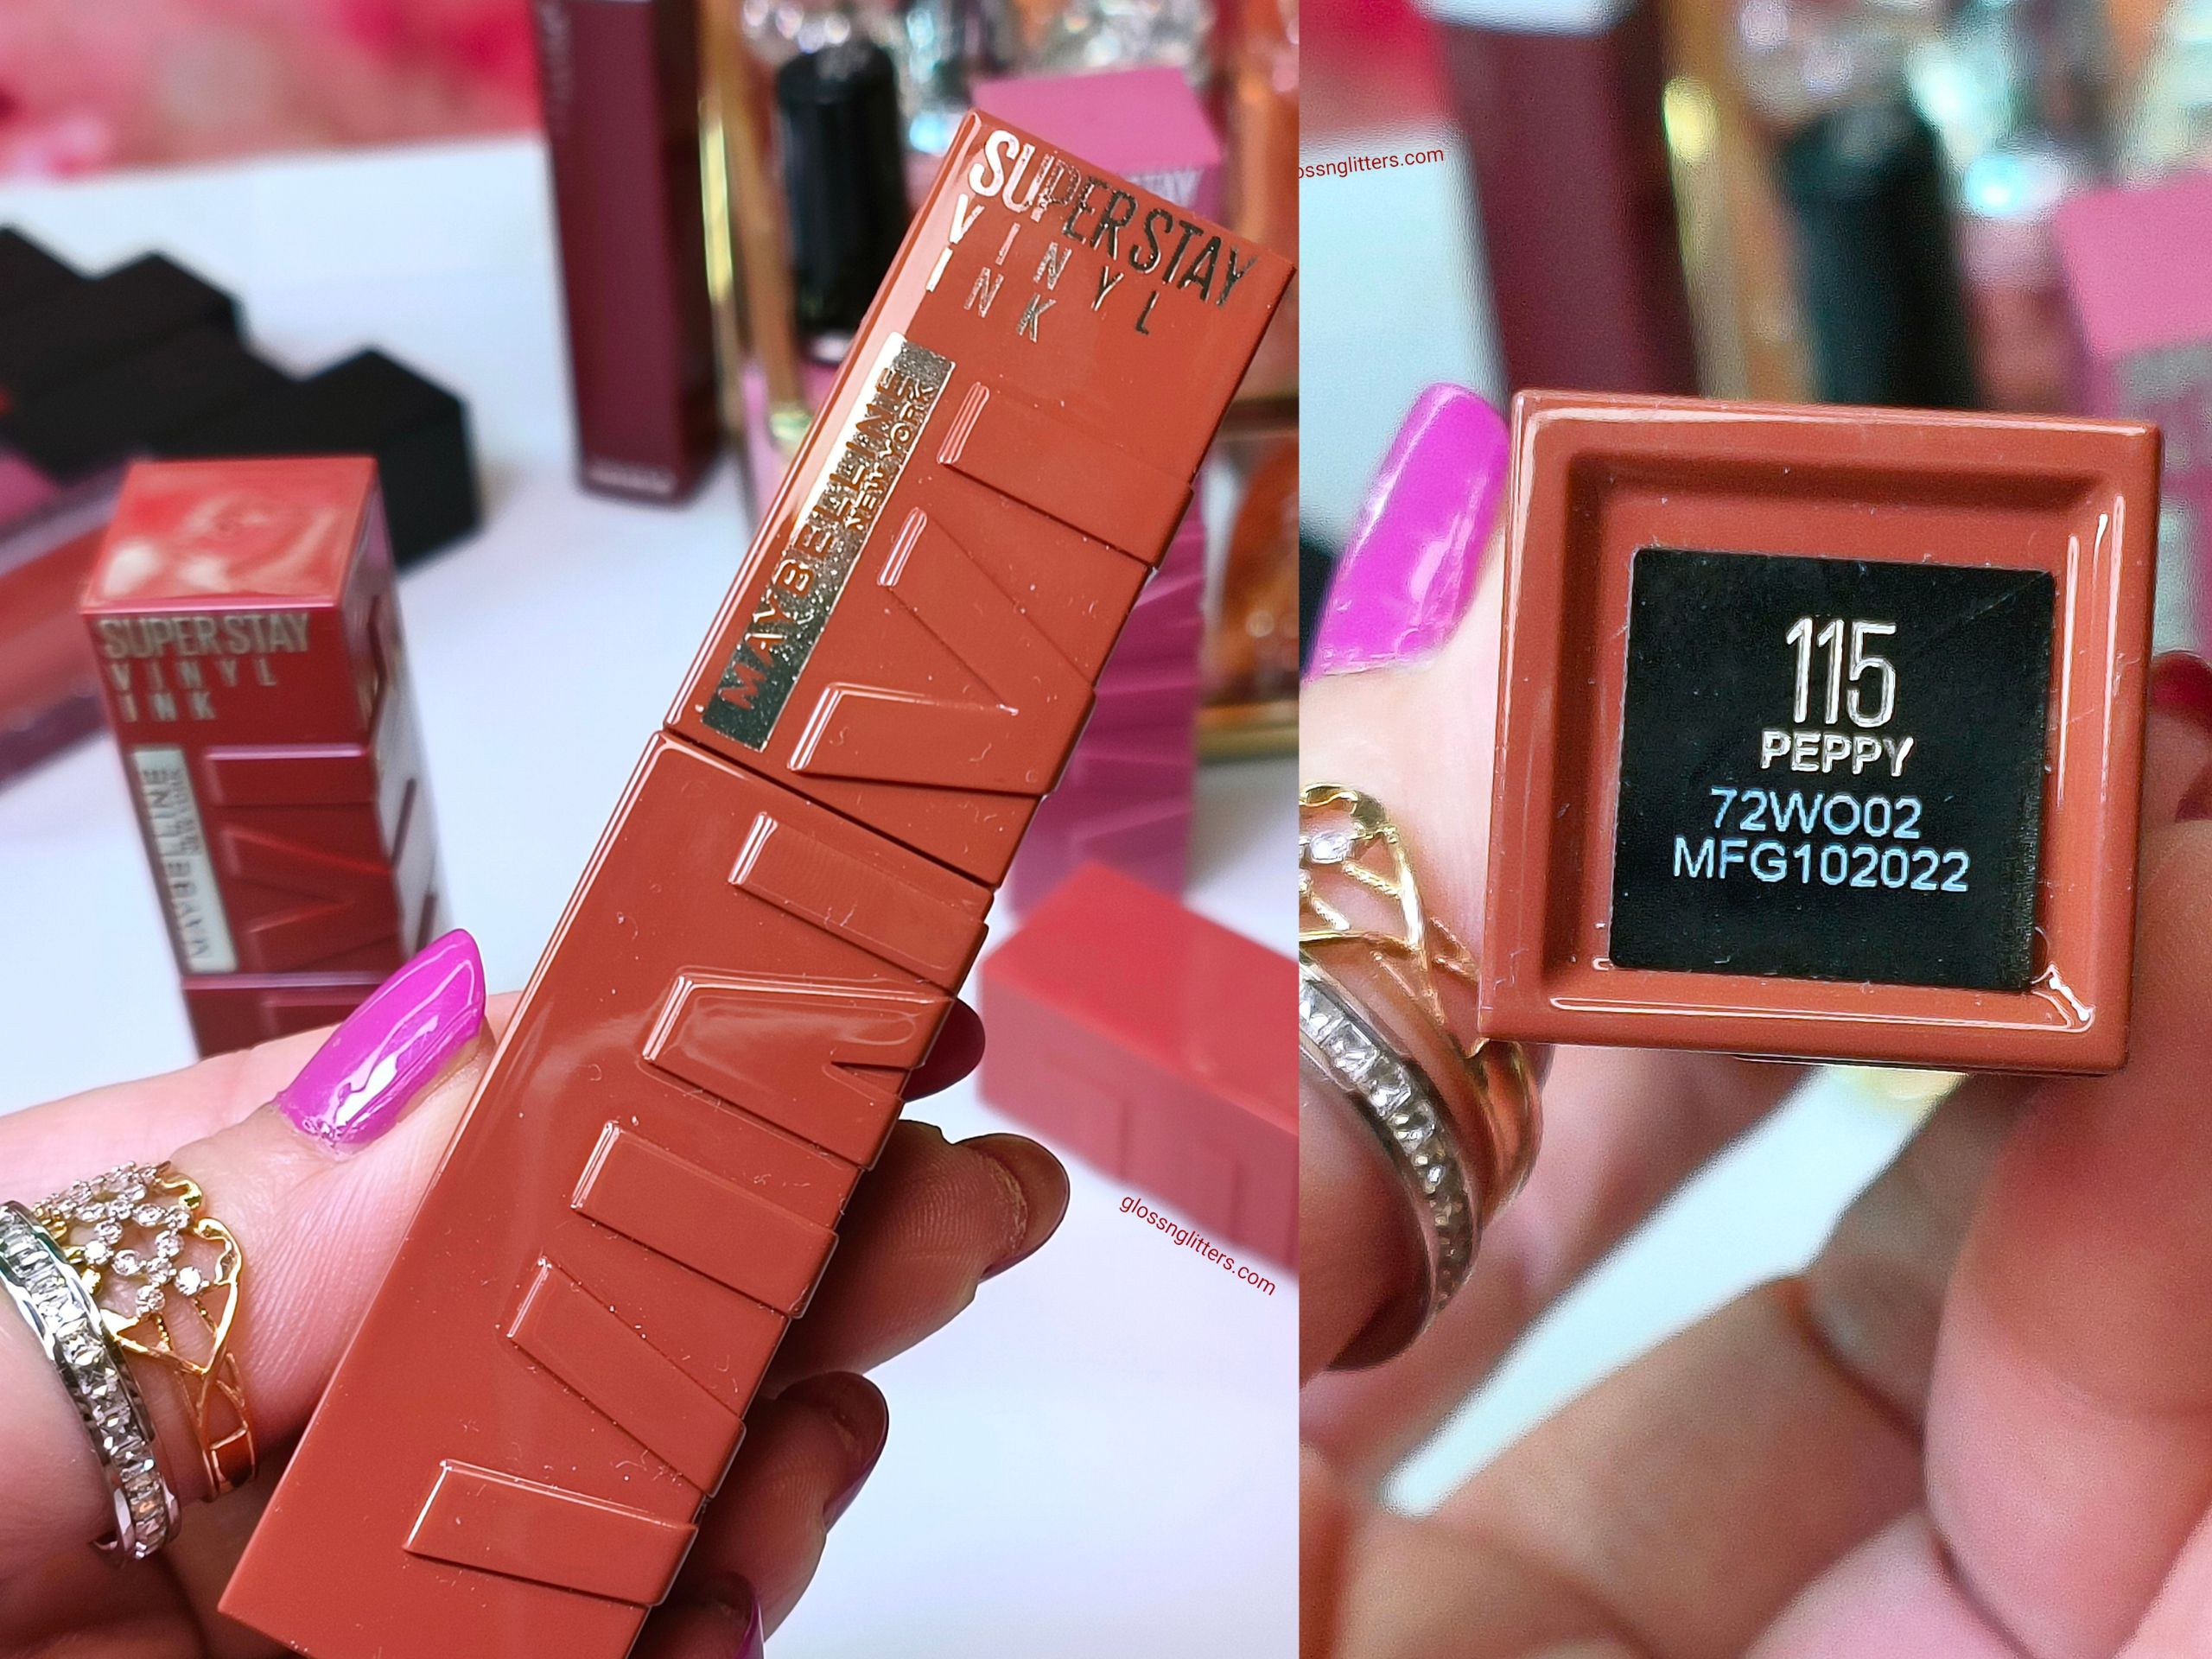 Maybelline Super Stay Vinyl Ink Liquid Lipcolor • Lipstick Review & Swatches